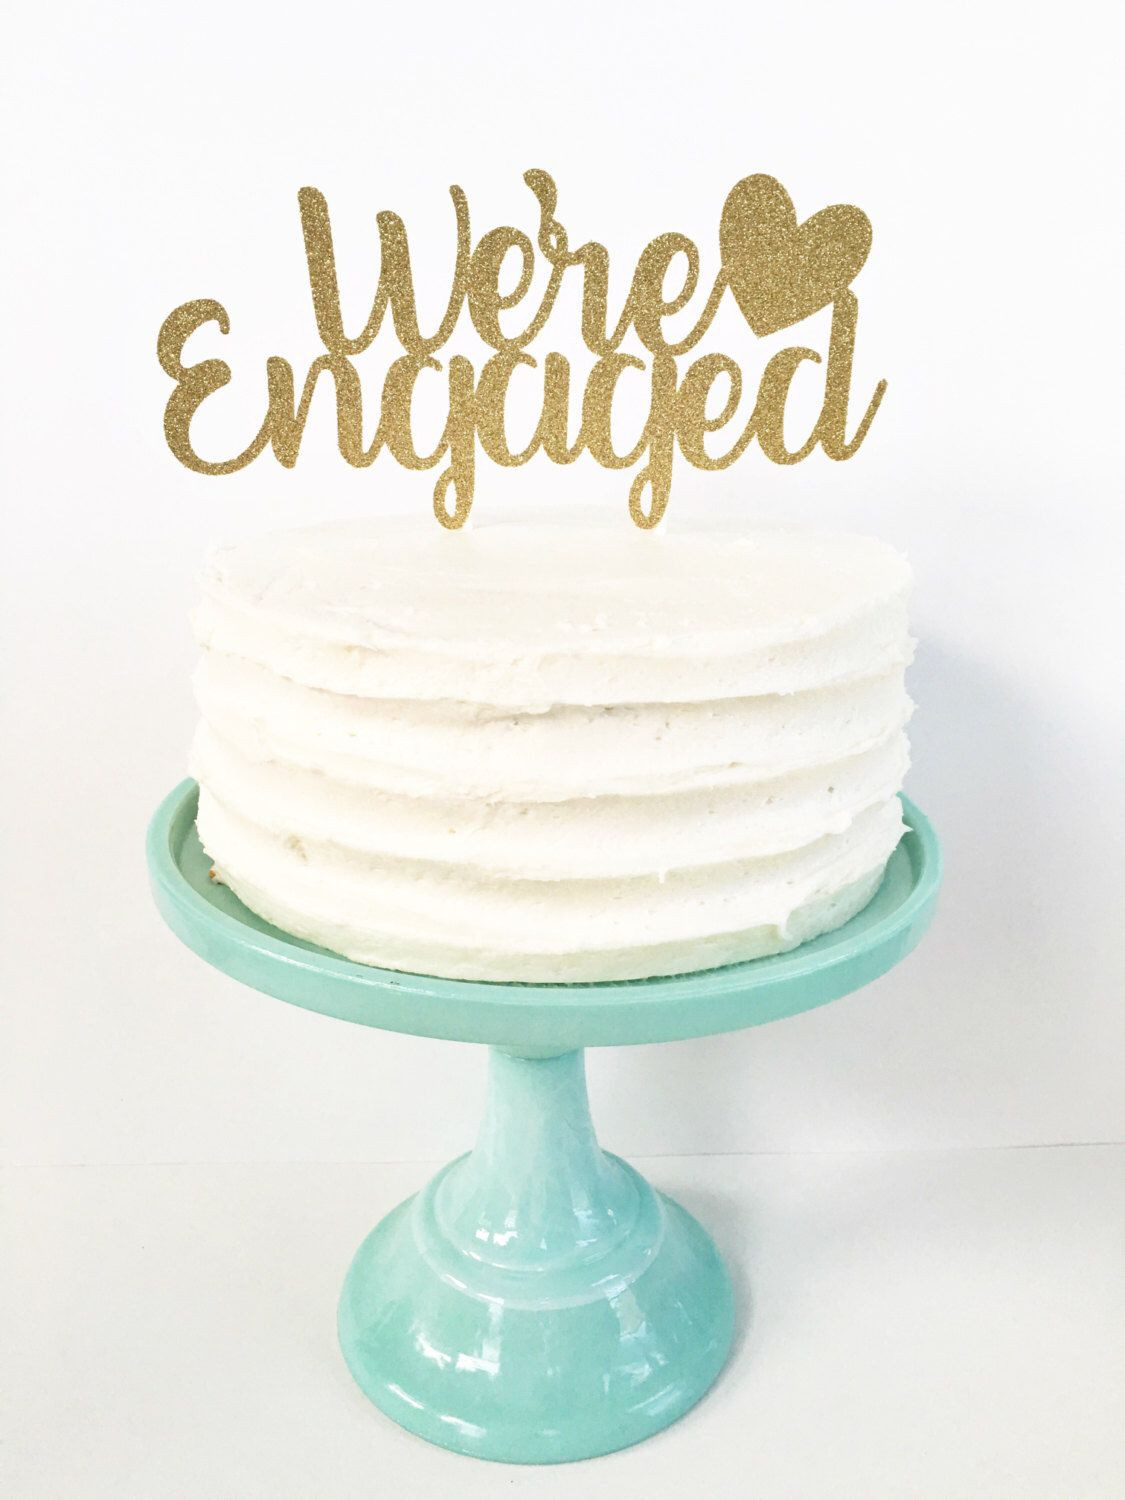 Engagement Party Cakes Ideas
 Pin by Nikki Hudson on Engagement Party